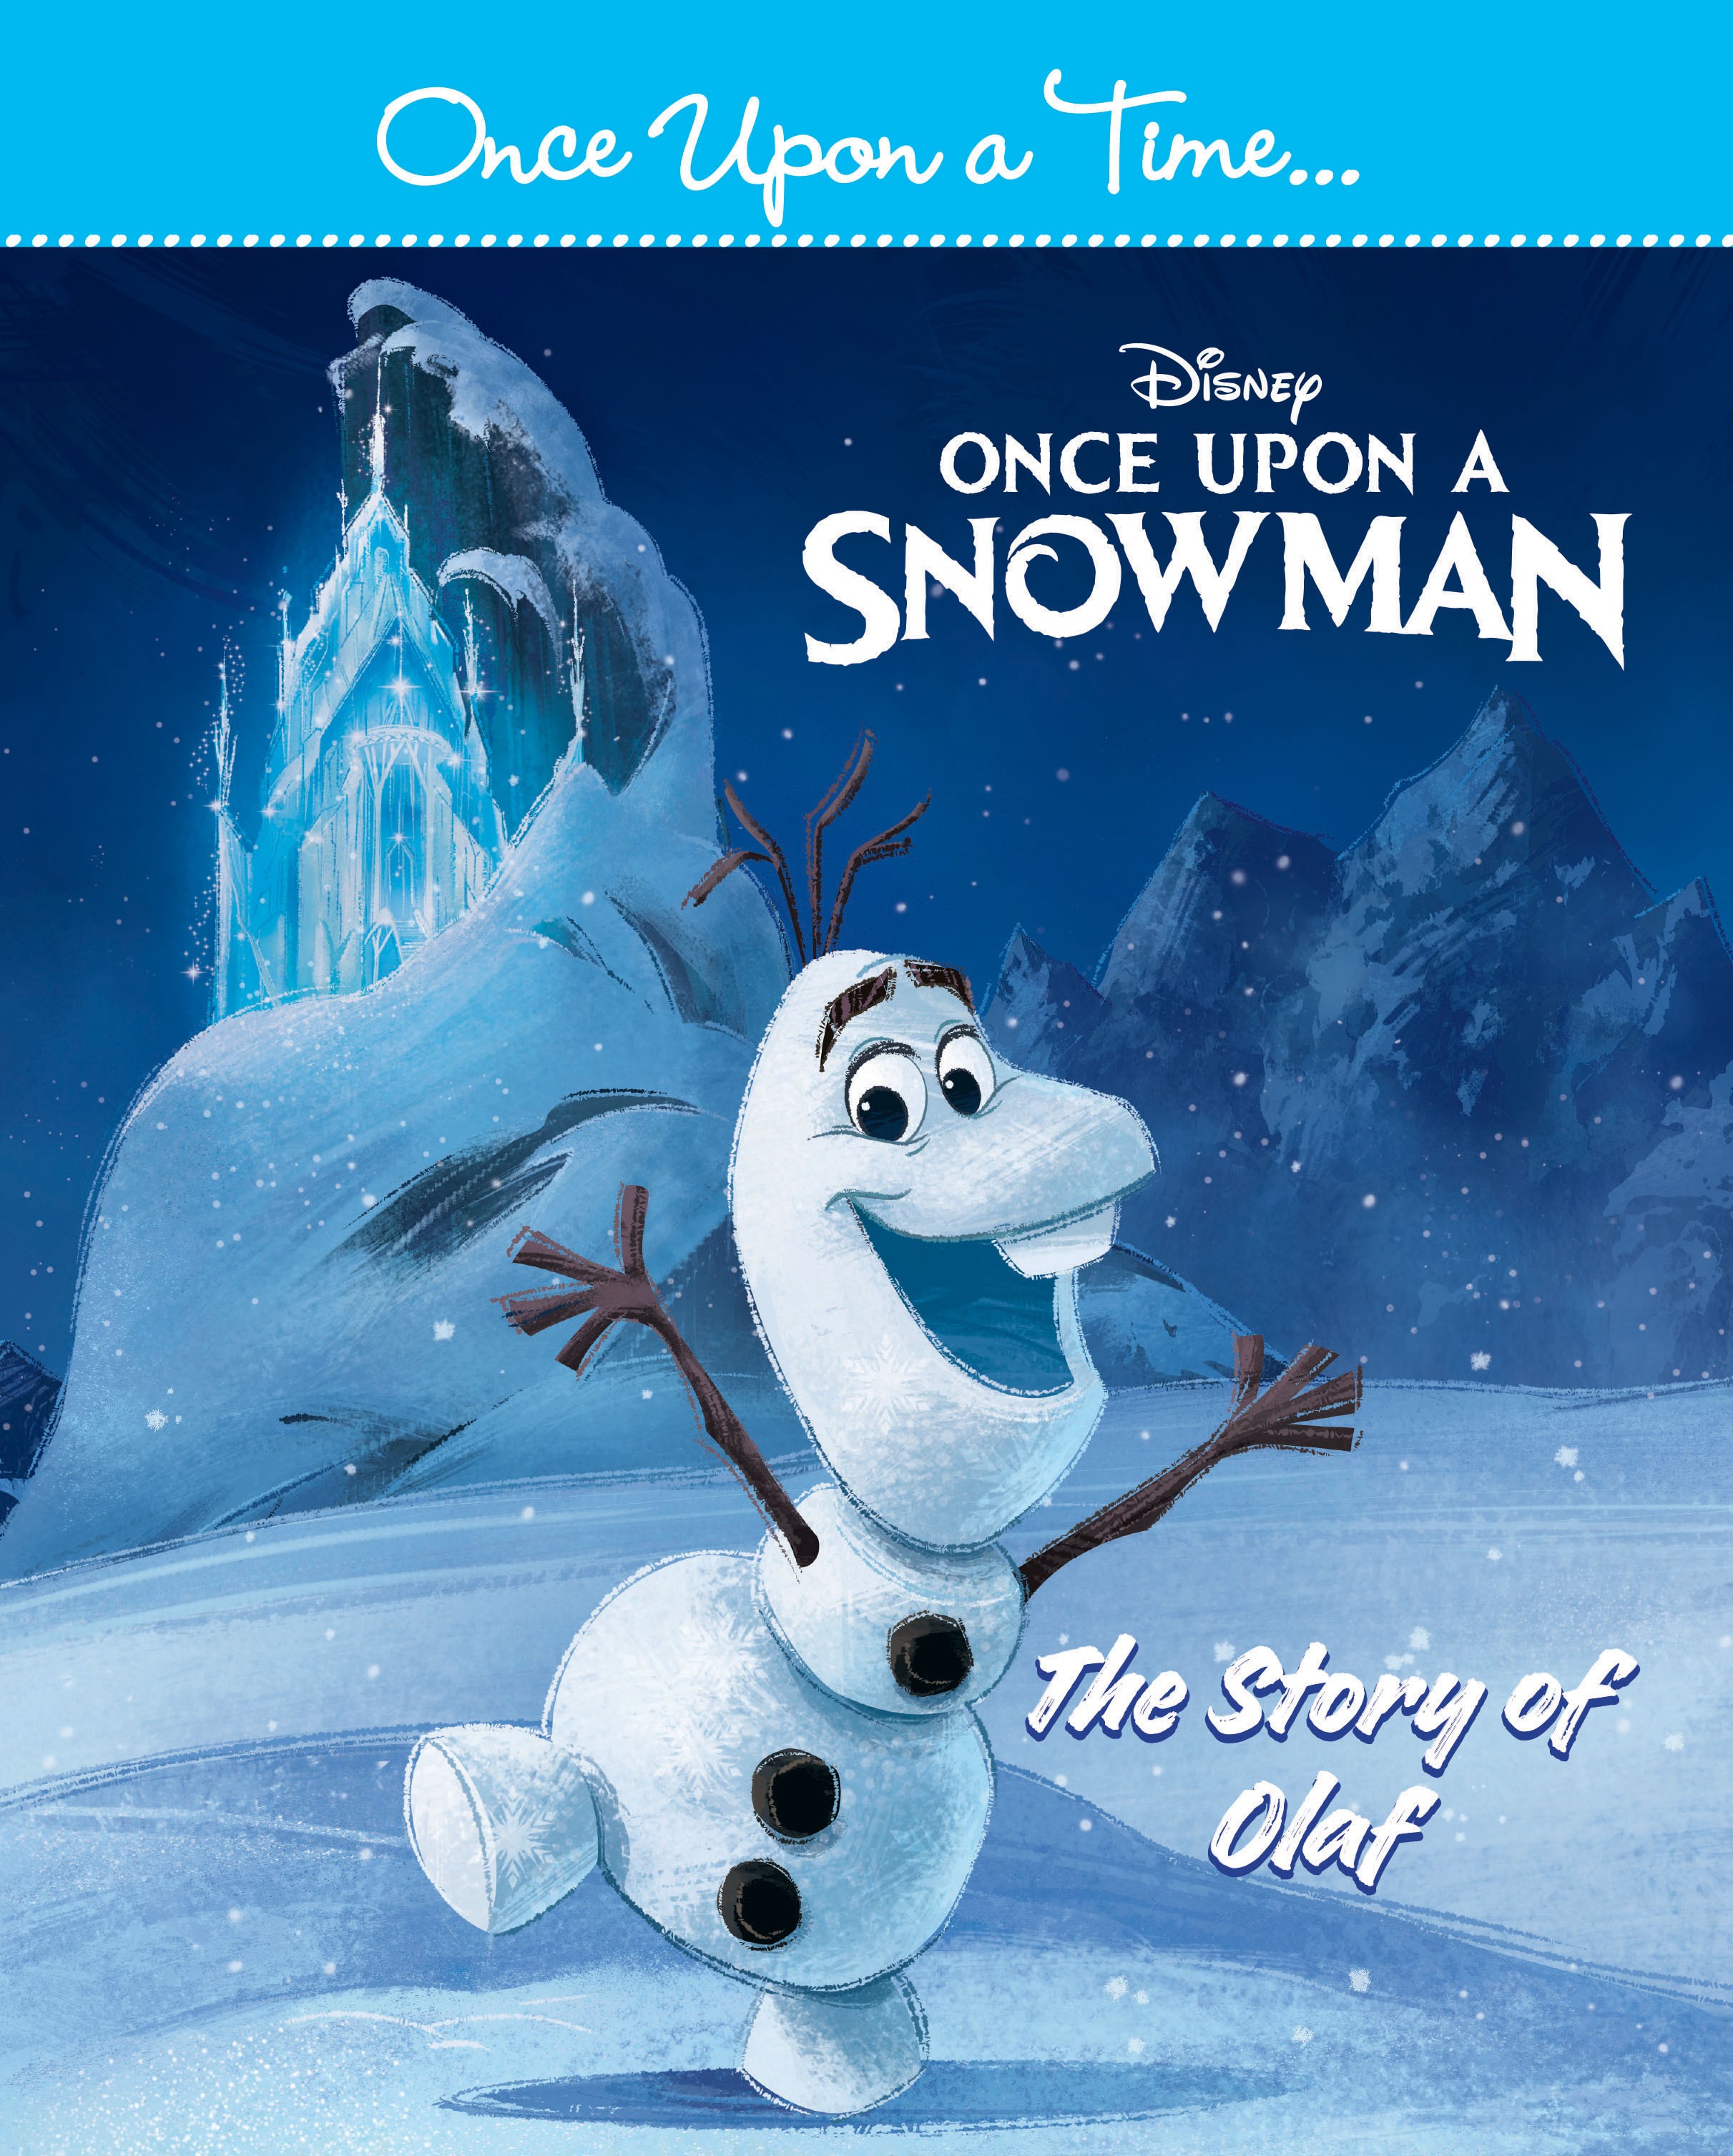 The Story of Olaf 